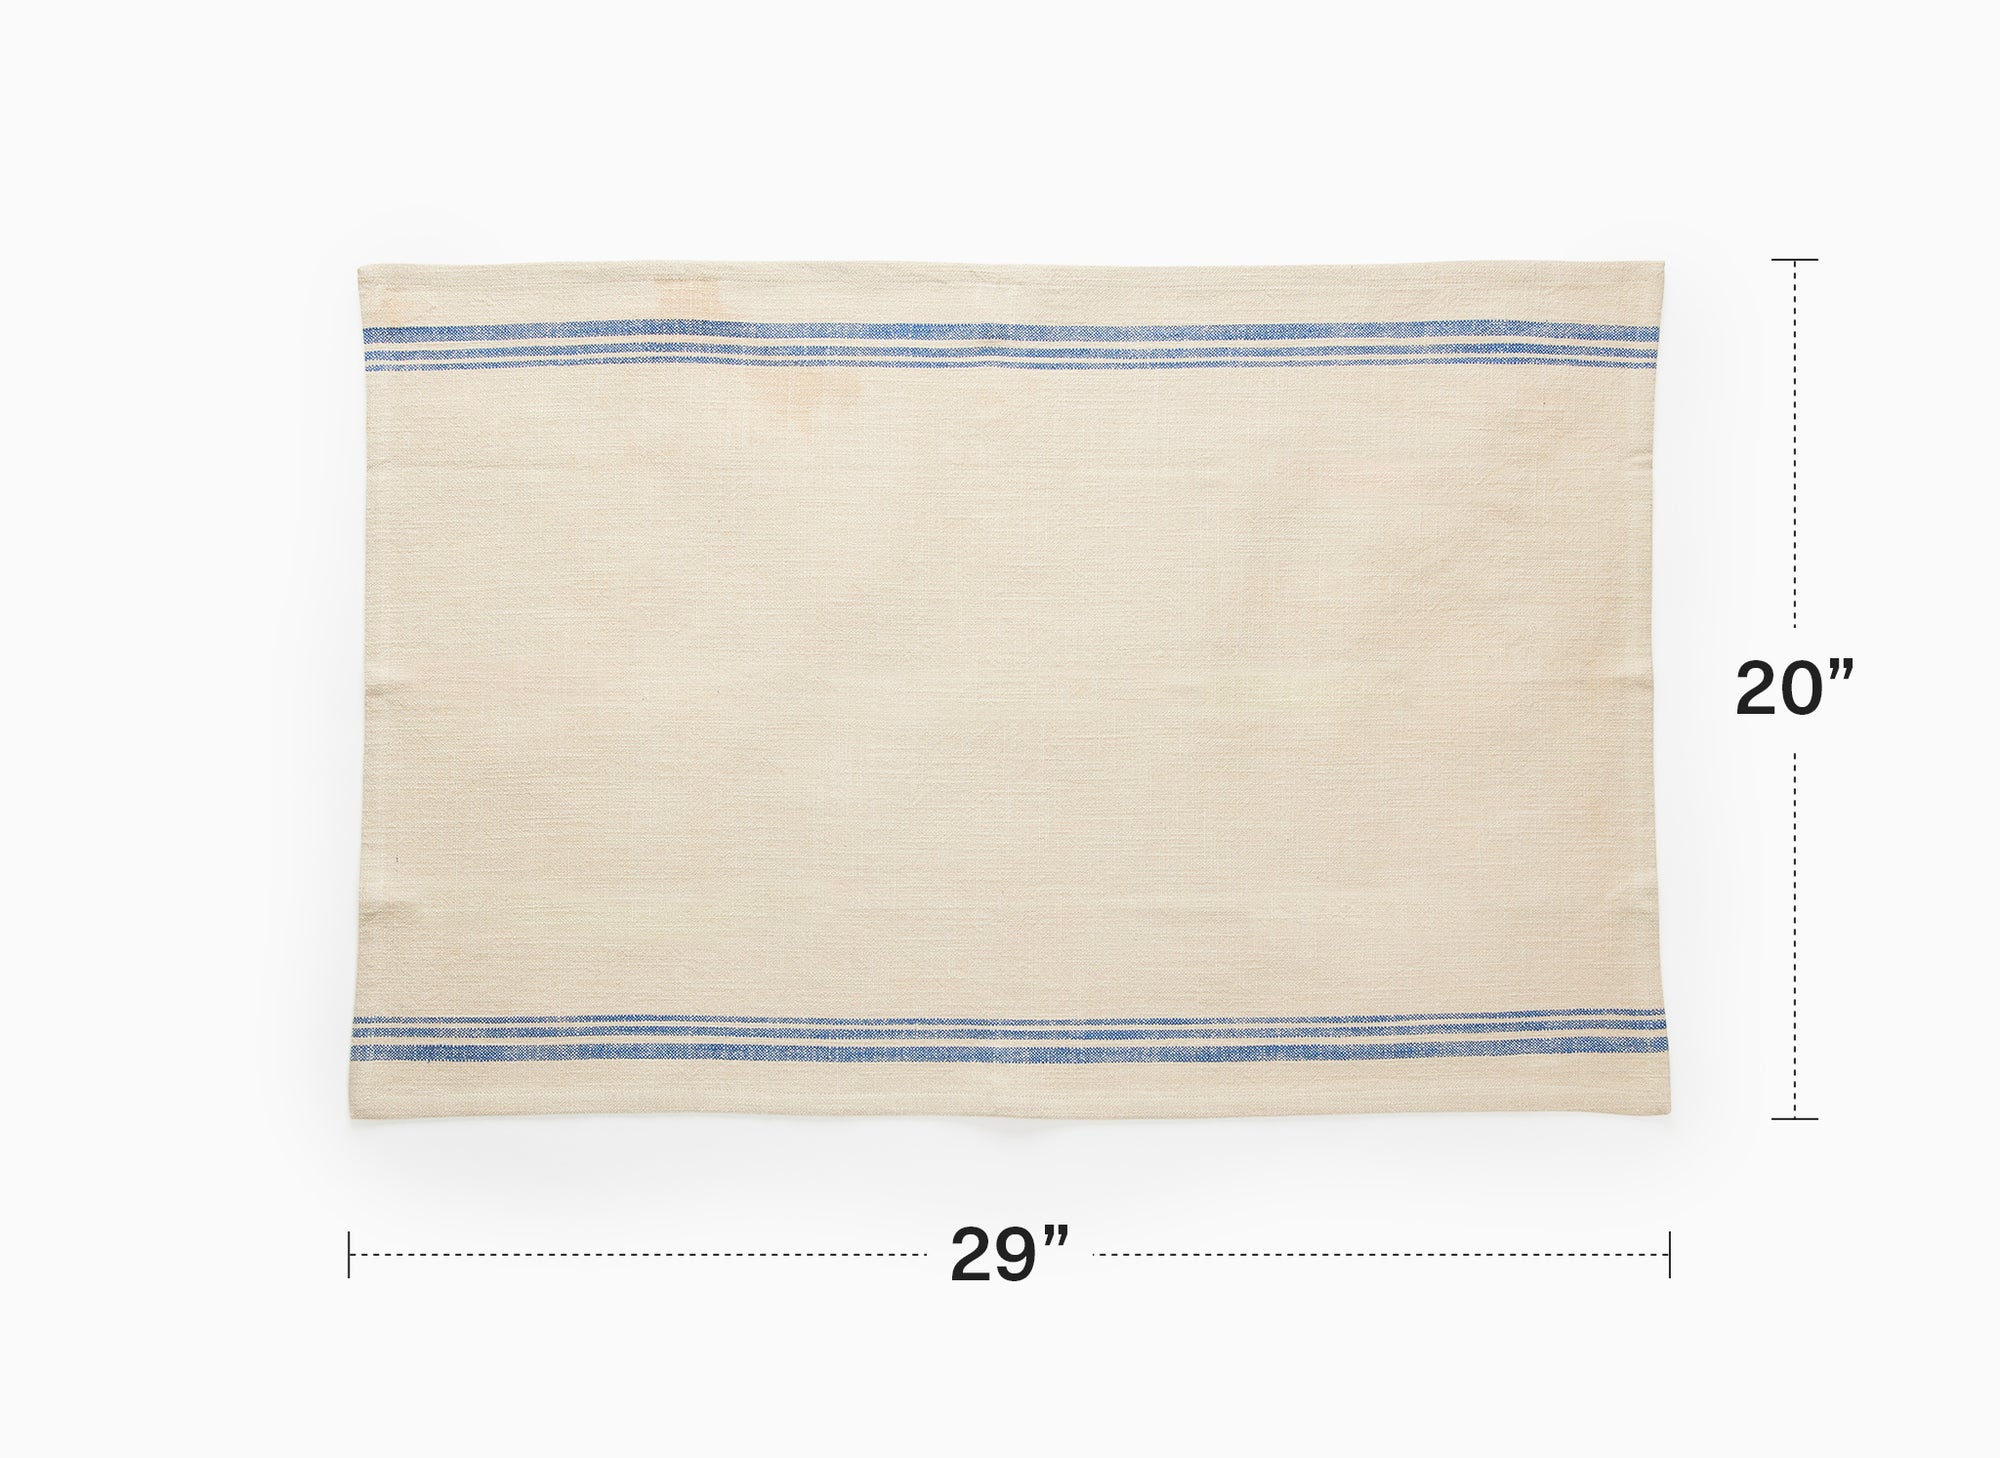 A single Misen Kitchen Towel lies flat on a white background. Graphics on the image show the towel’s measurements: 20 inches tall by 29 inches wide.